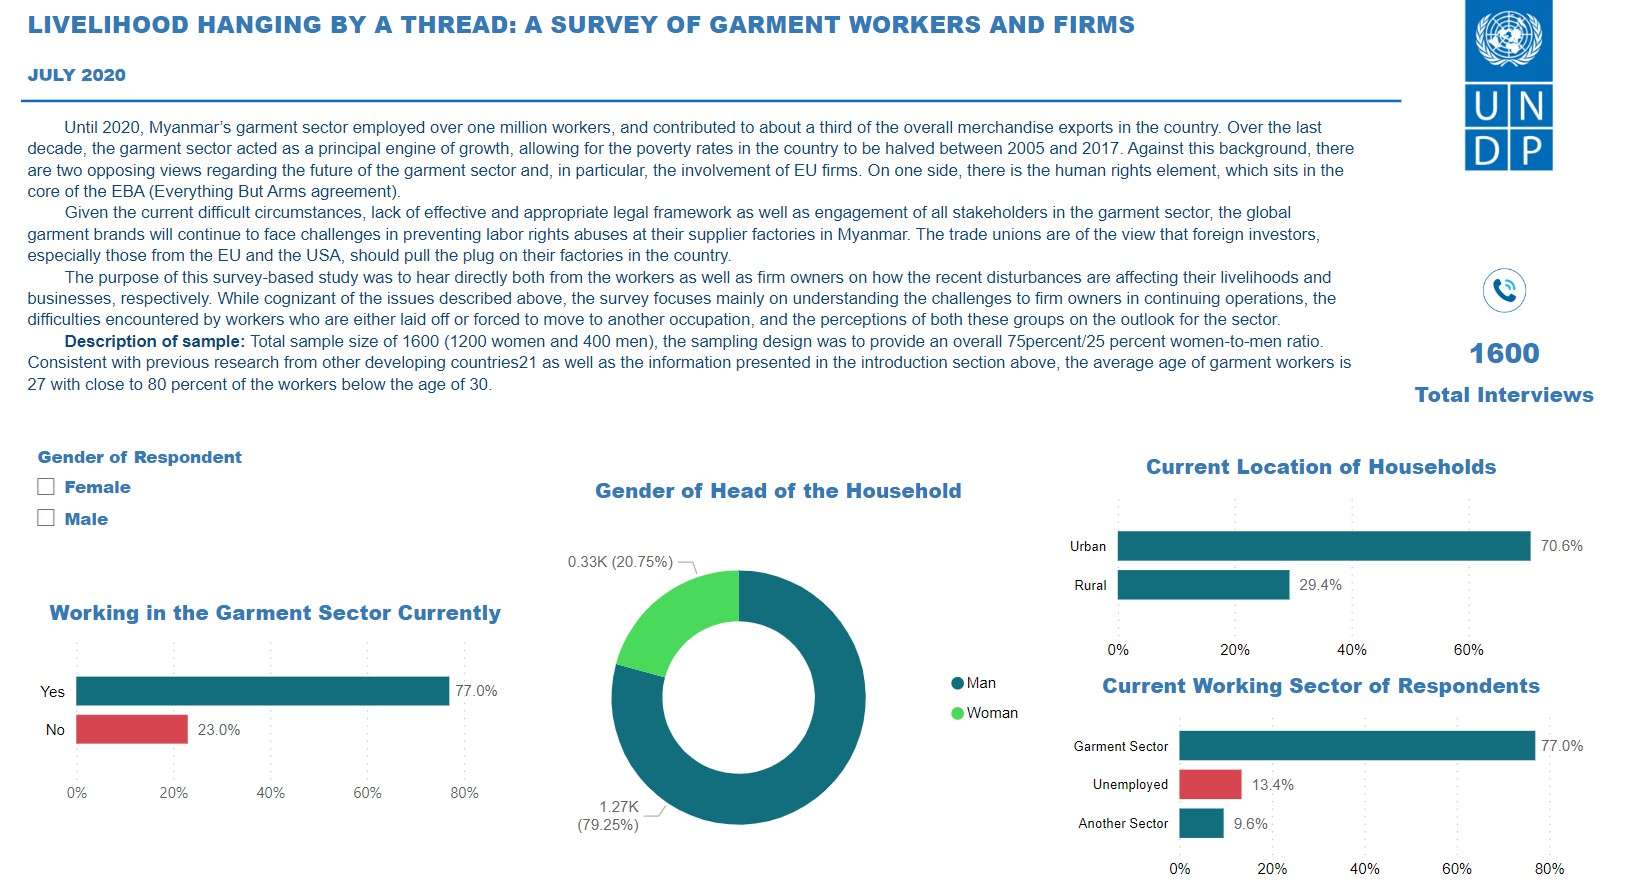 Dashboard: Livelihoods Hanging by a Thread​: A Survey of Garment Workers and Firms in Yangon, Myanmar​